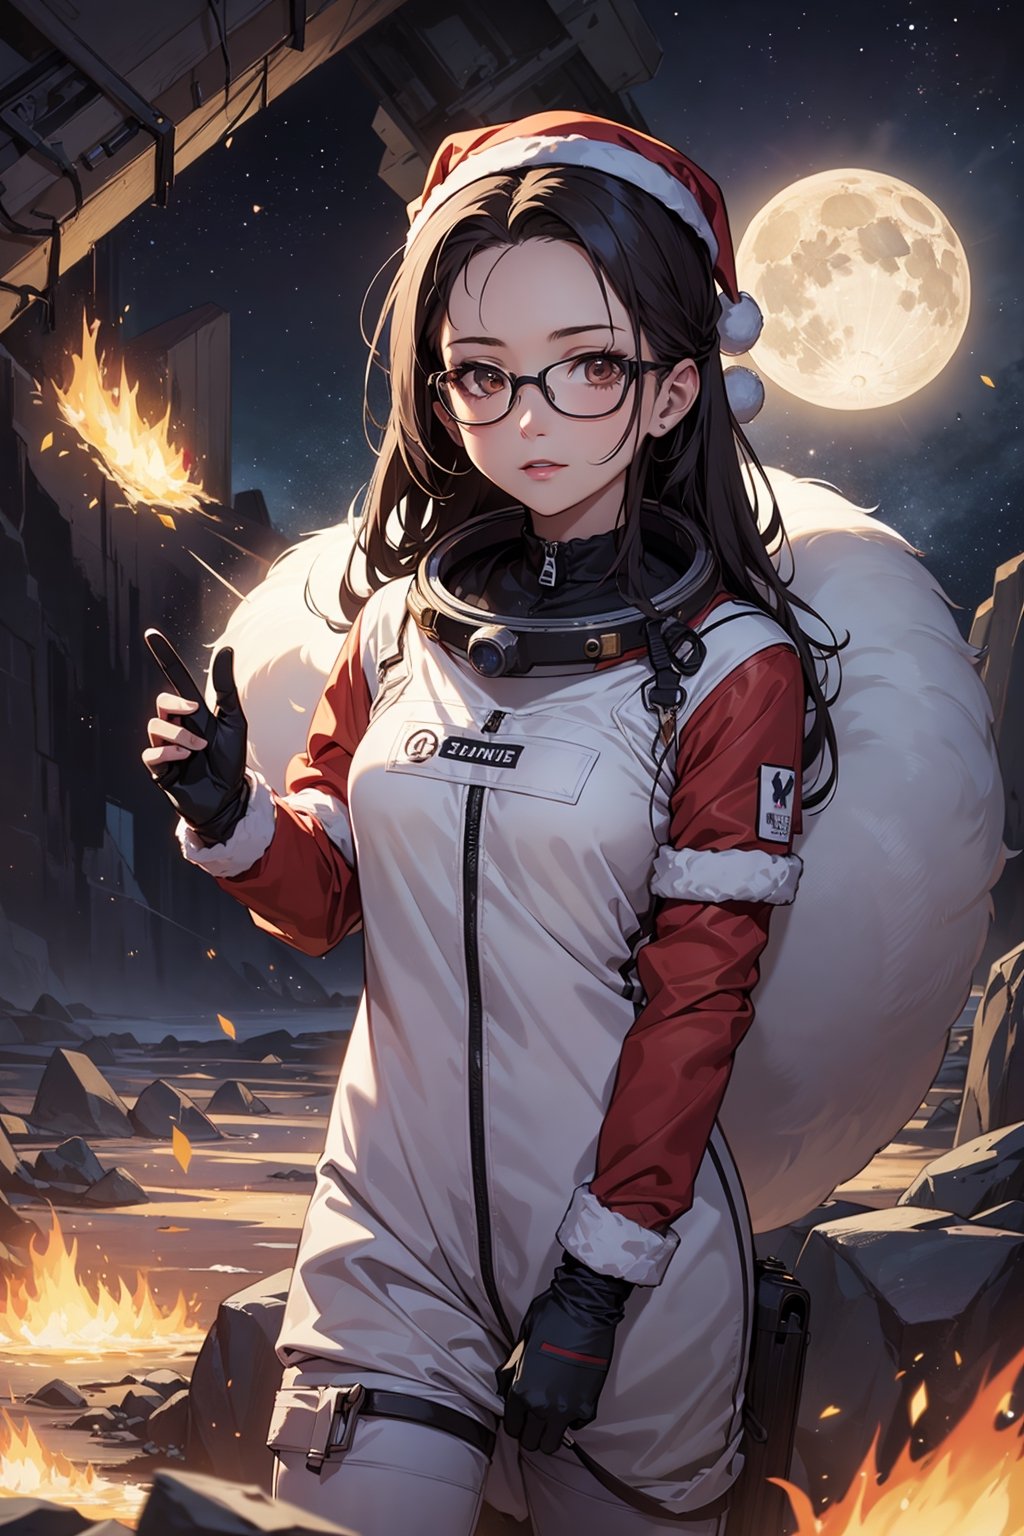 (absurdres, highres, ultra detailed), (1girl:1.3), (beautiful and aesthetic:1.3), brown_eyes, black_hair, straight hair, , (forehead:1.1), glasses , (confused expression:1.3), (space suit:1.2), smile,
BREAK
(dramatic lighting:1.2), cold colors, long shadows, vibrant colors, soft glow, anime style, otherworldly atmosphere
BREAK
alien planet, floating rocks, glowing plants, starry sky, surreal moon, beautiful, masterpiece, best quality
(santa:1.3)

